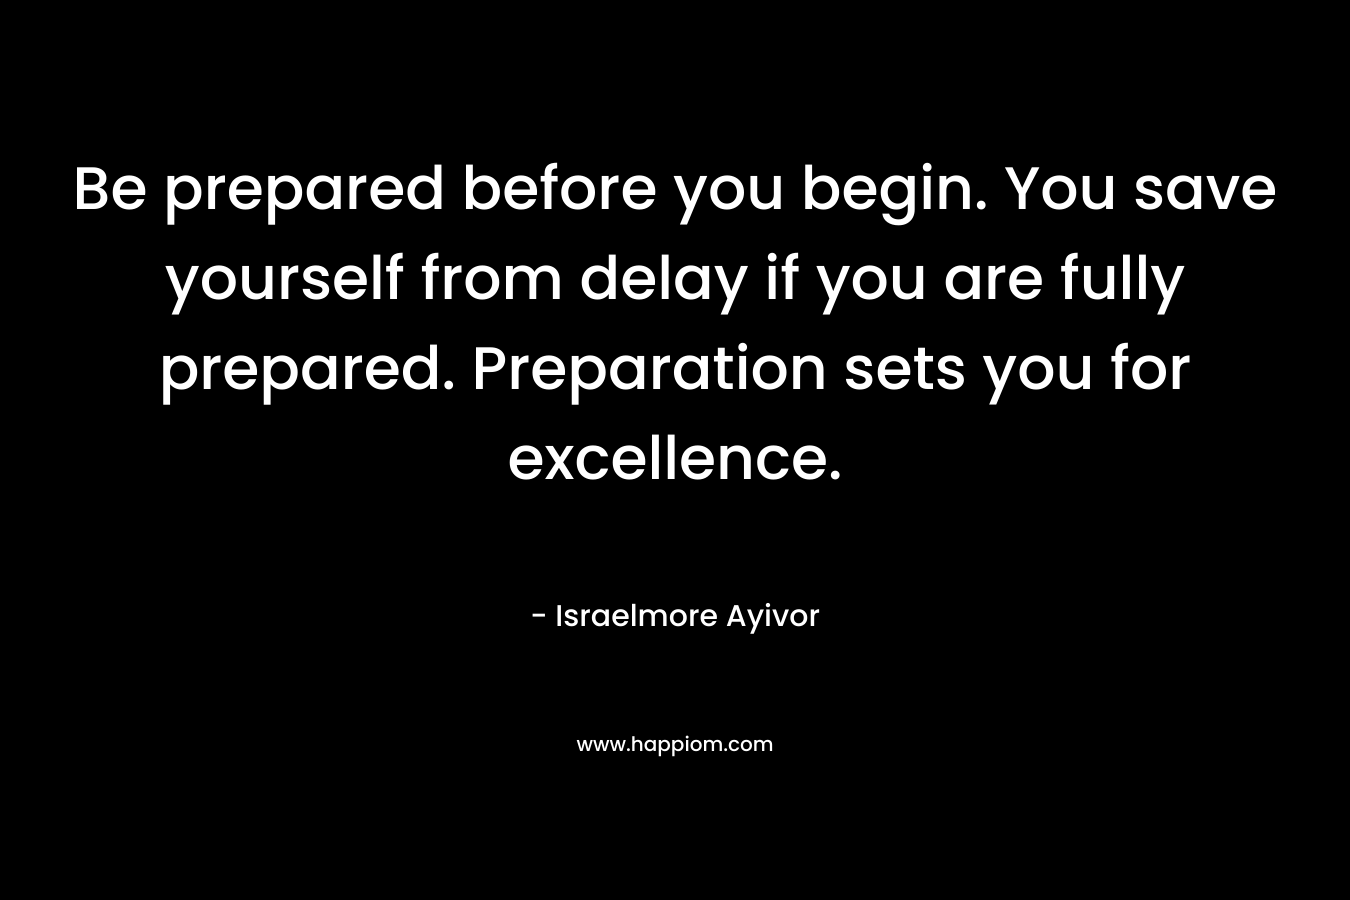 Be prepared before you begin. You save yourself from delay if you are fully prepared. Preparation sets you for excellence.